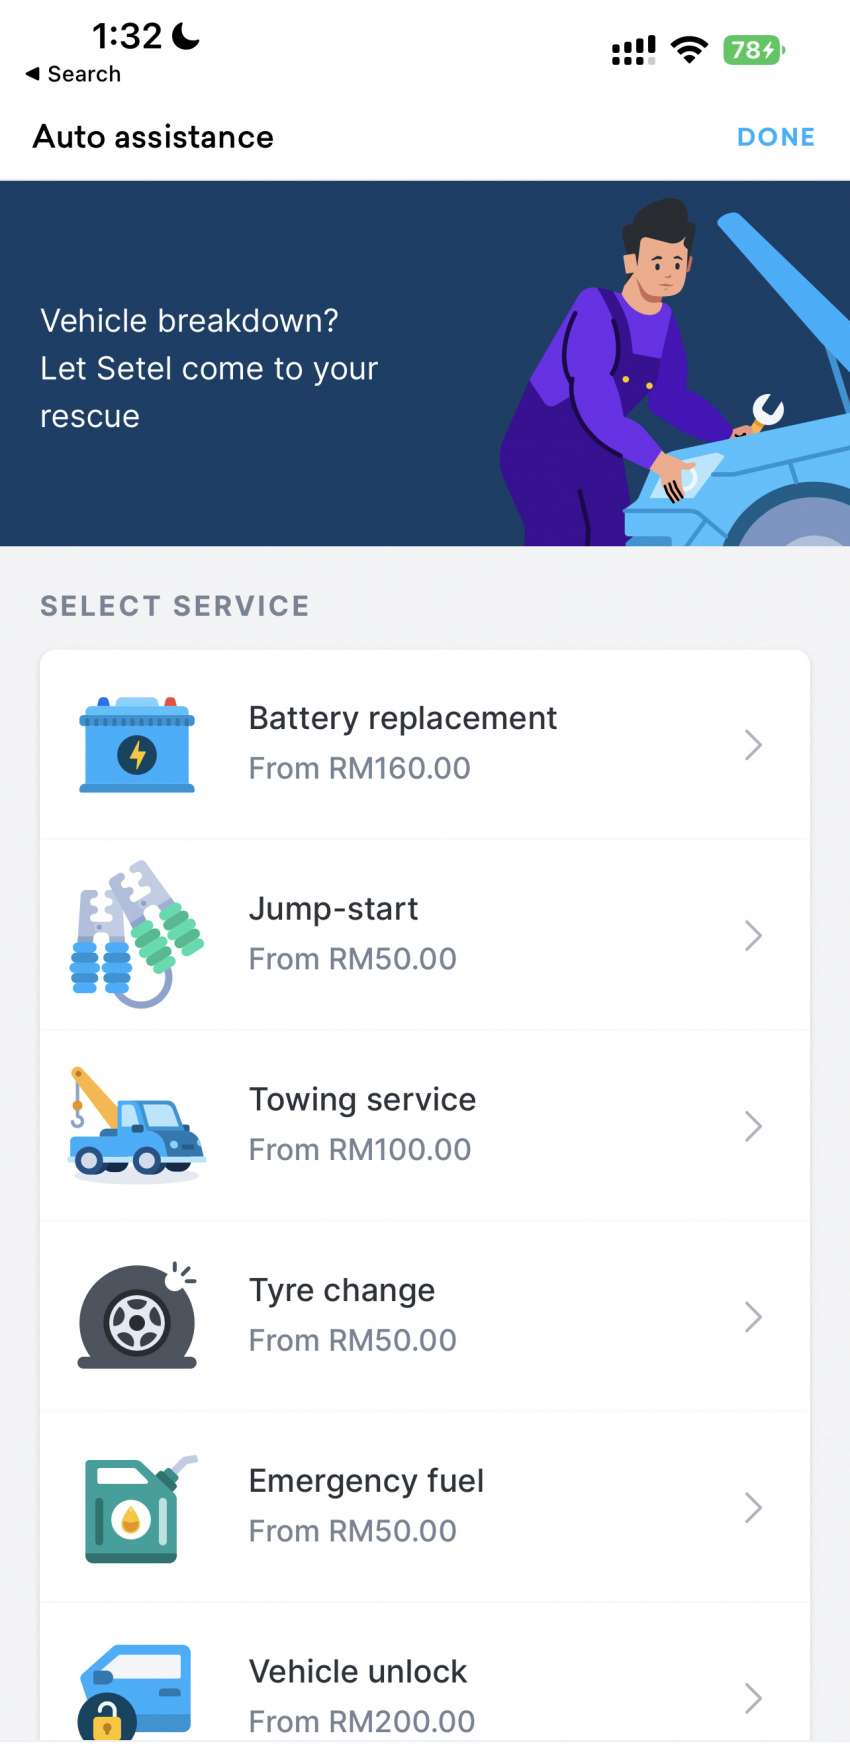 Setel introduces new auto assistance feature – jump-start, battery replacement, vehicle towing services 1531290